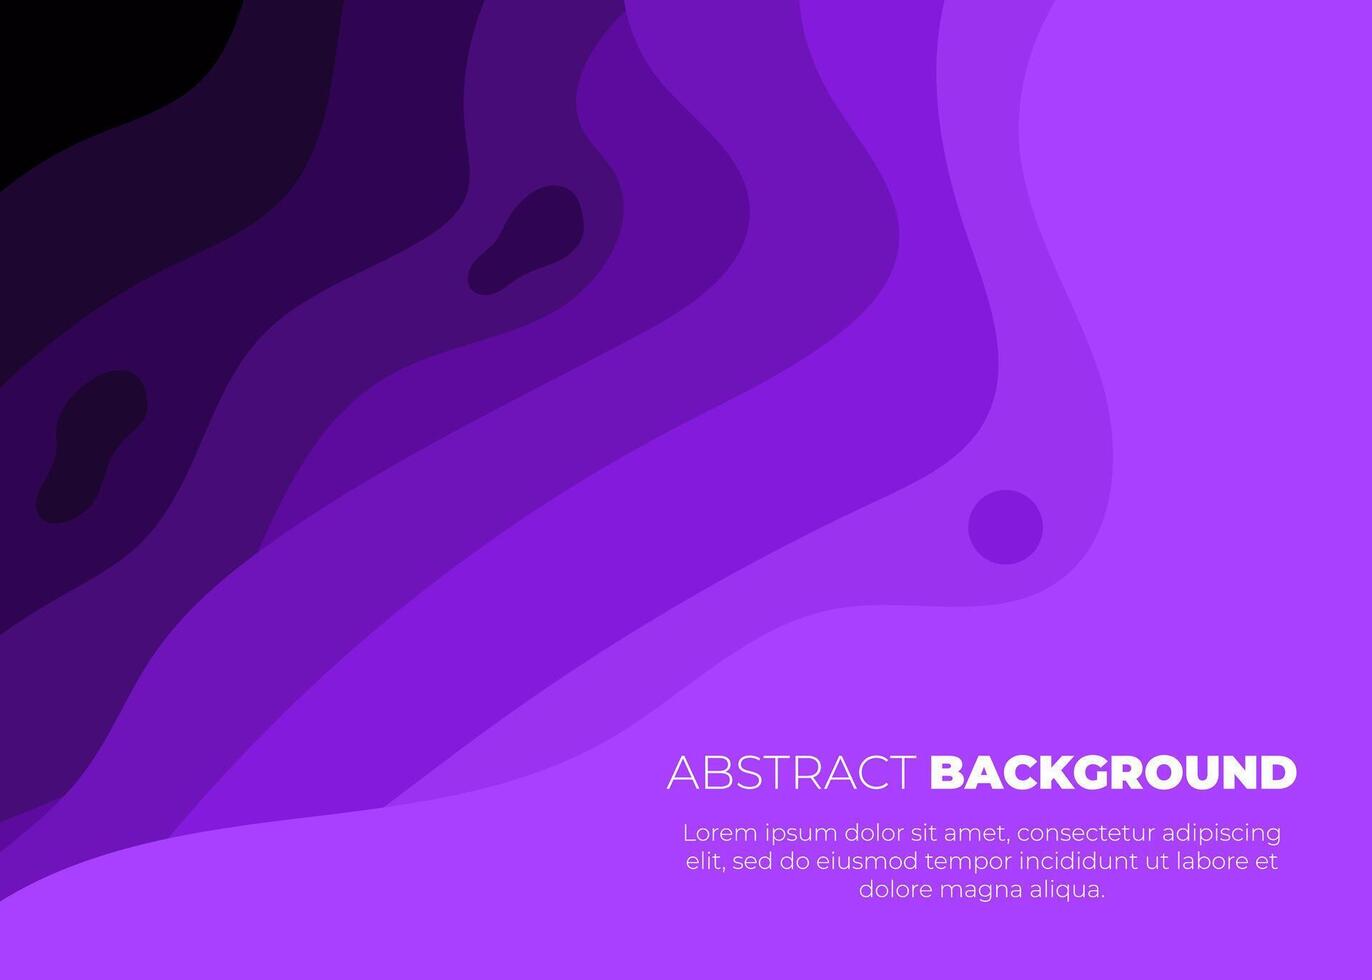 Free vector abstract paper cut banner template backgrounds paper cut shapes template for banner